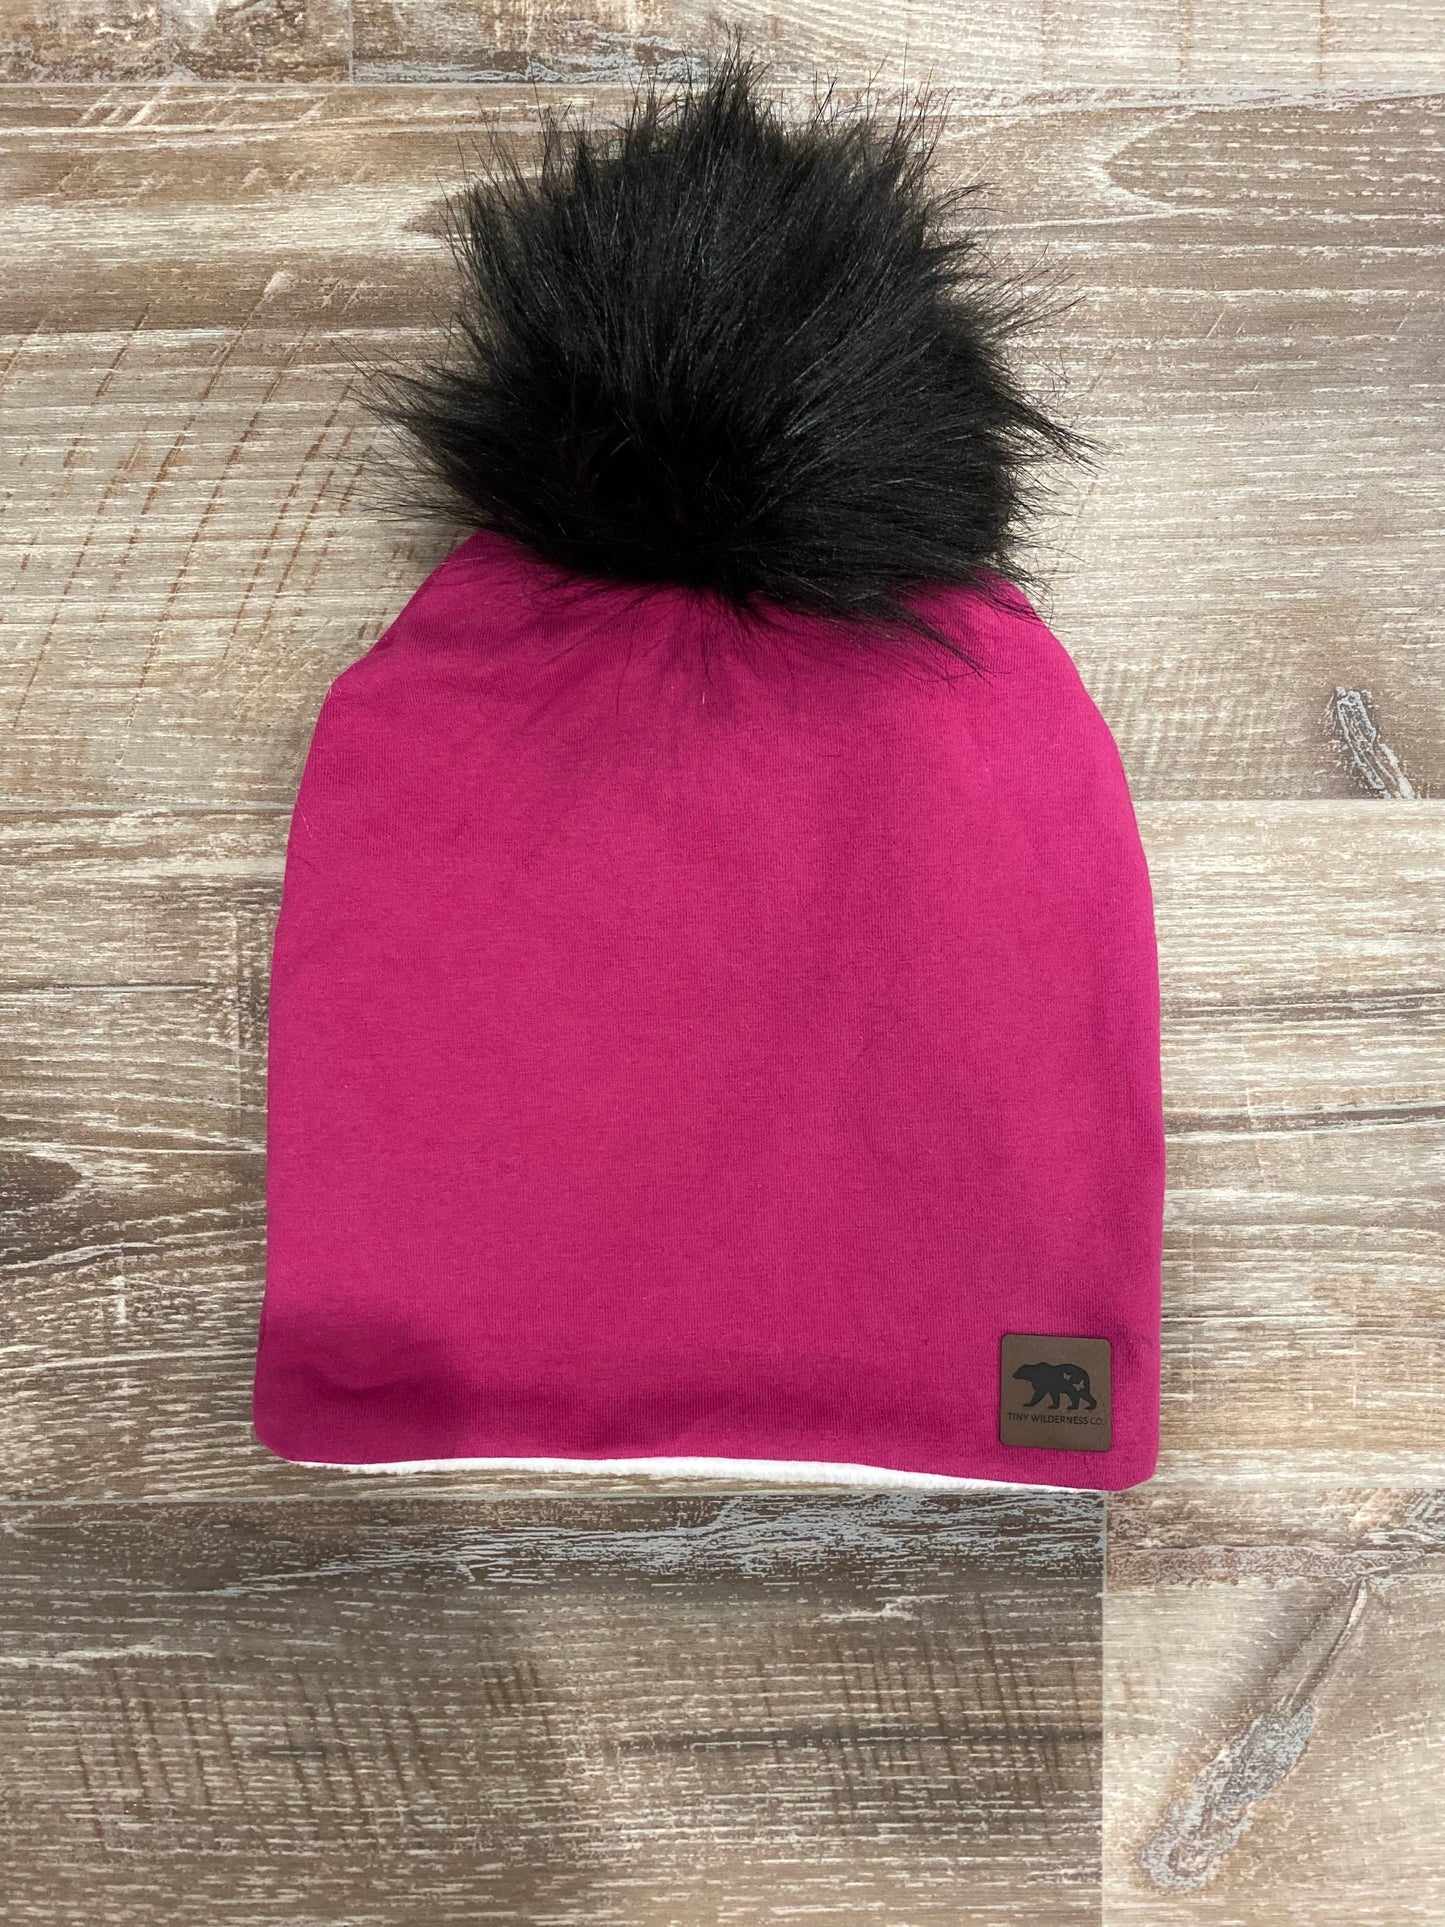 Beanies - Adult S/M